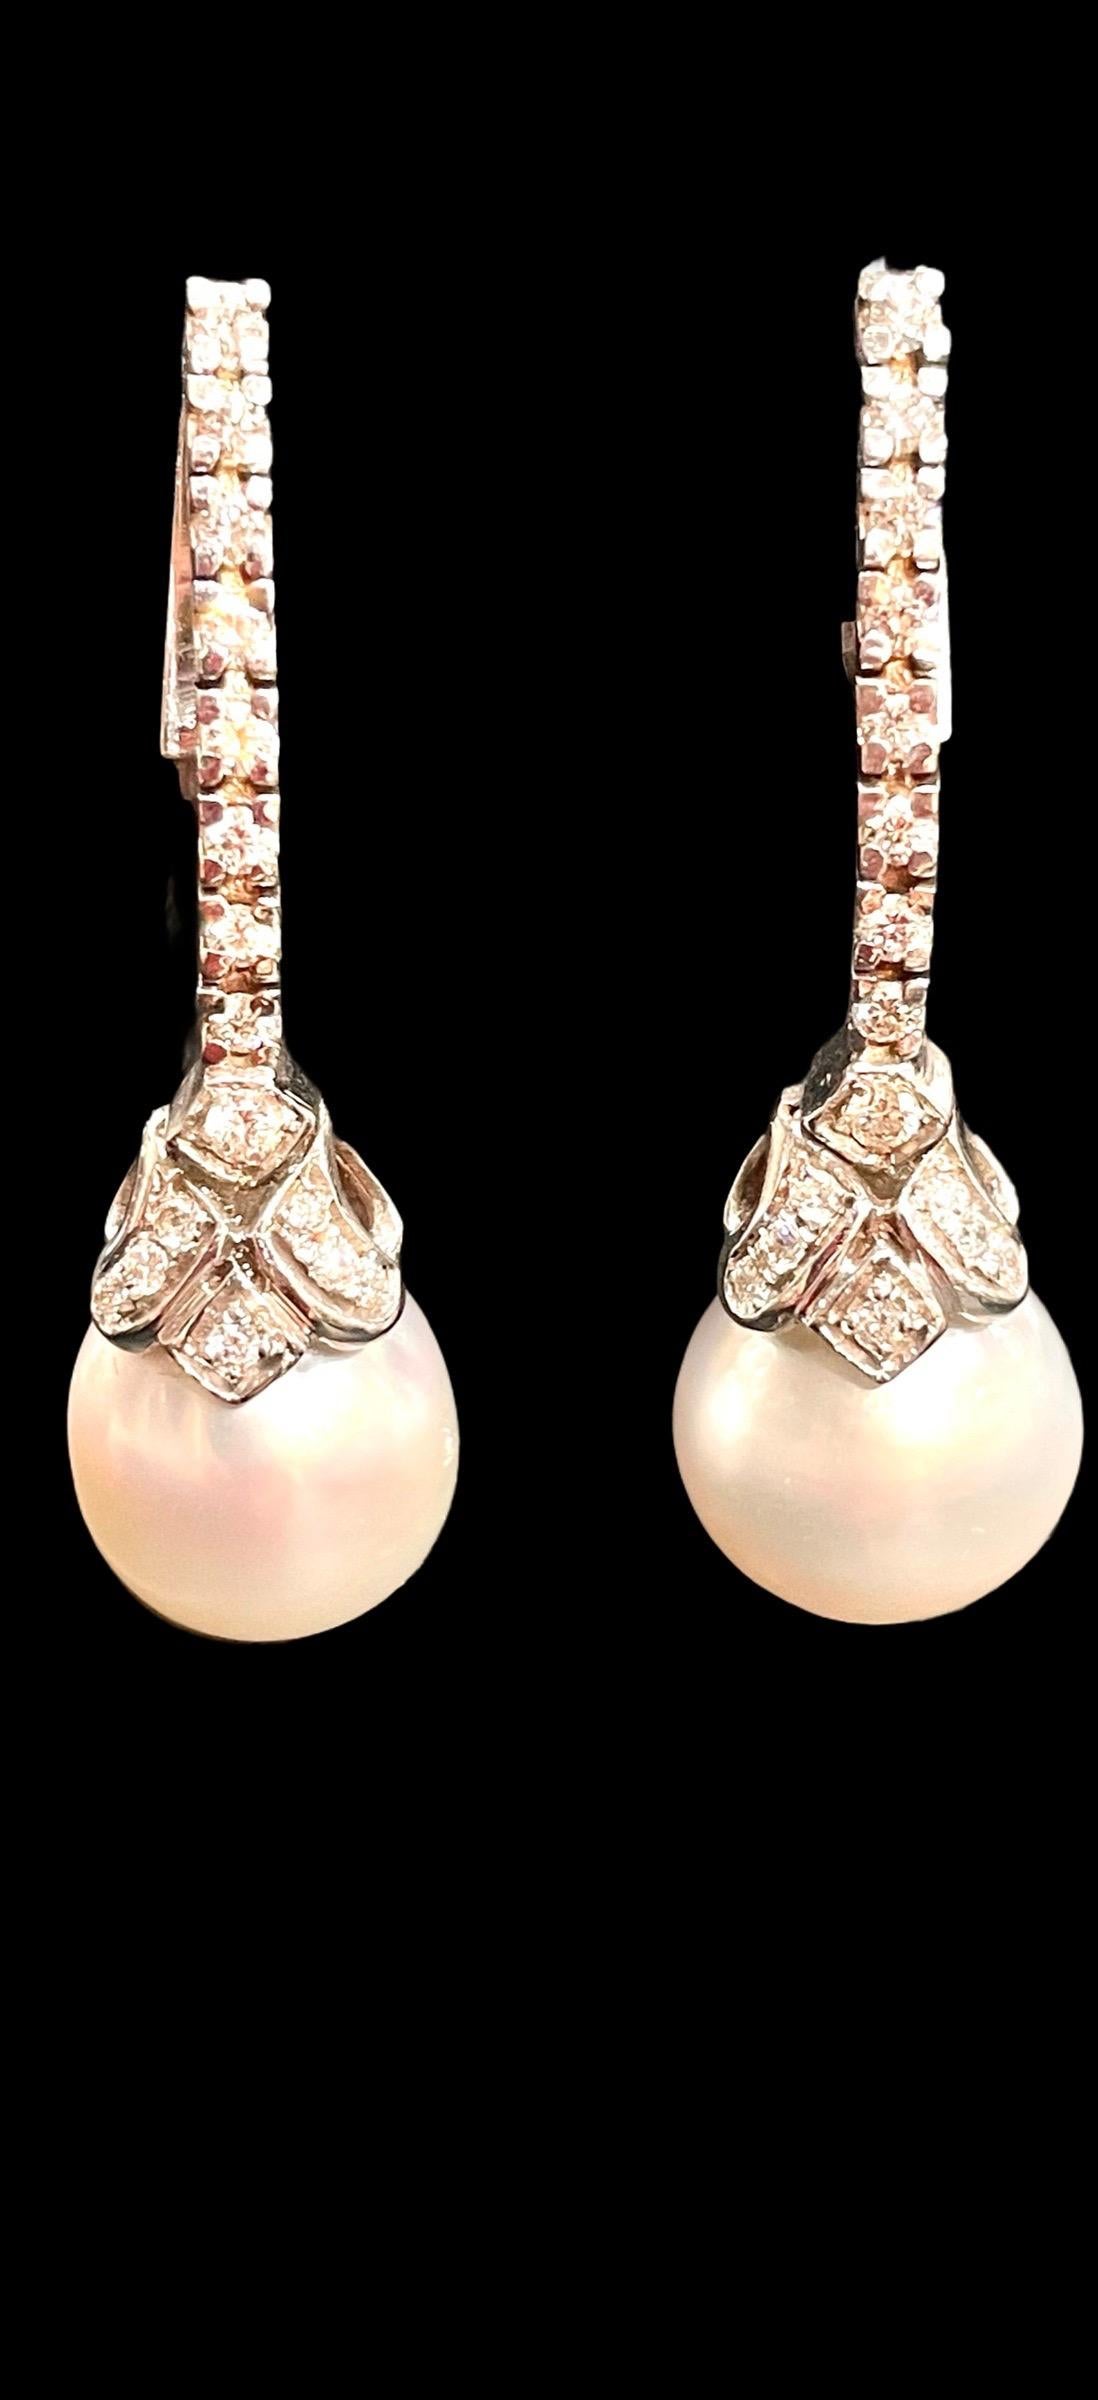 HK Fine Estate Jewels is pleased to present these stunning French pearl pendant earrings. Each earrings is set with a white cultured pearl with excellent luster to a brilliant-cut diamond surmount and are approximately 42mm. These are marked with 